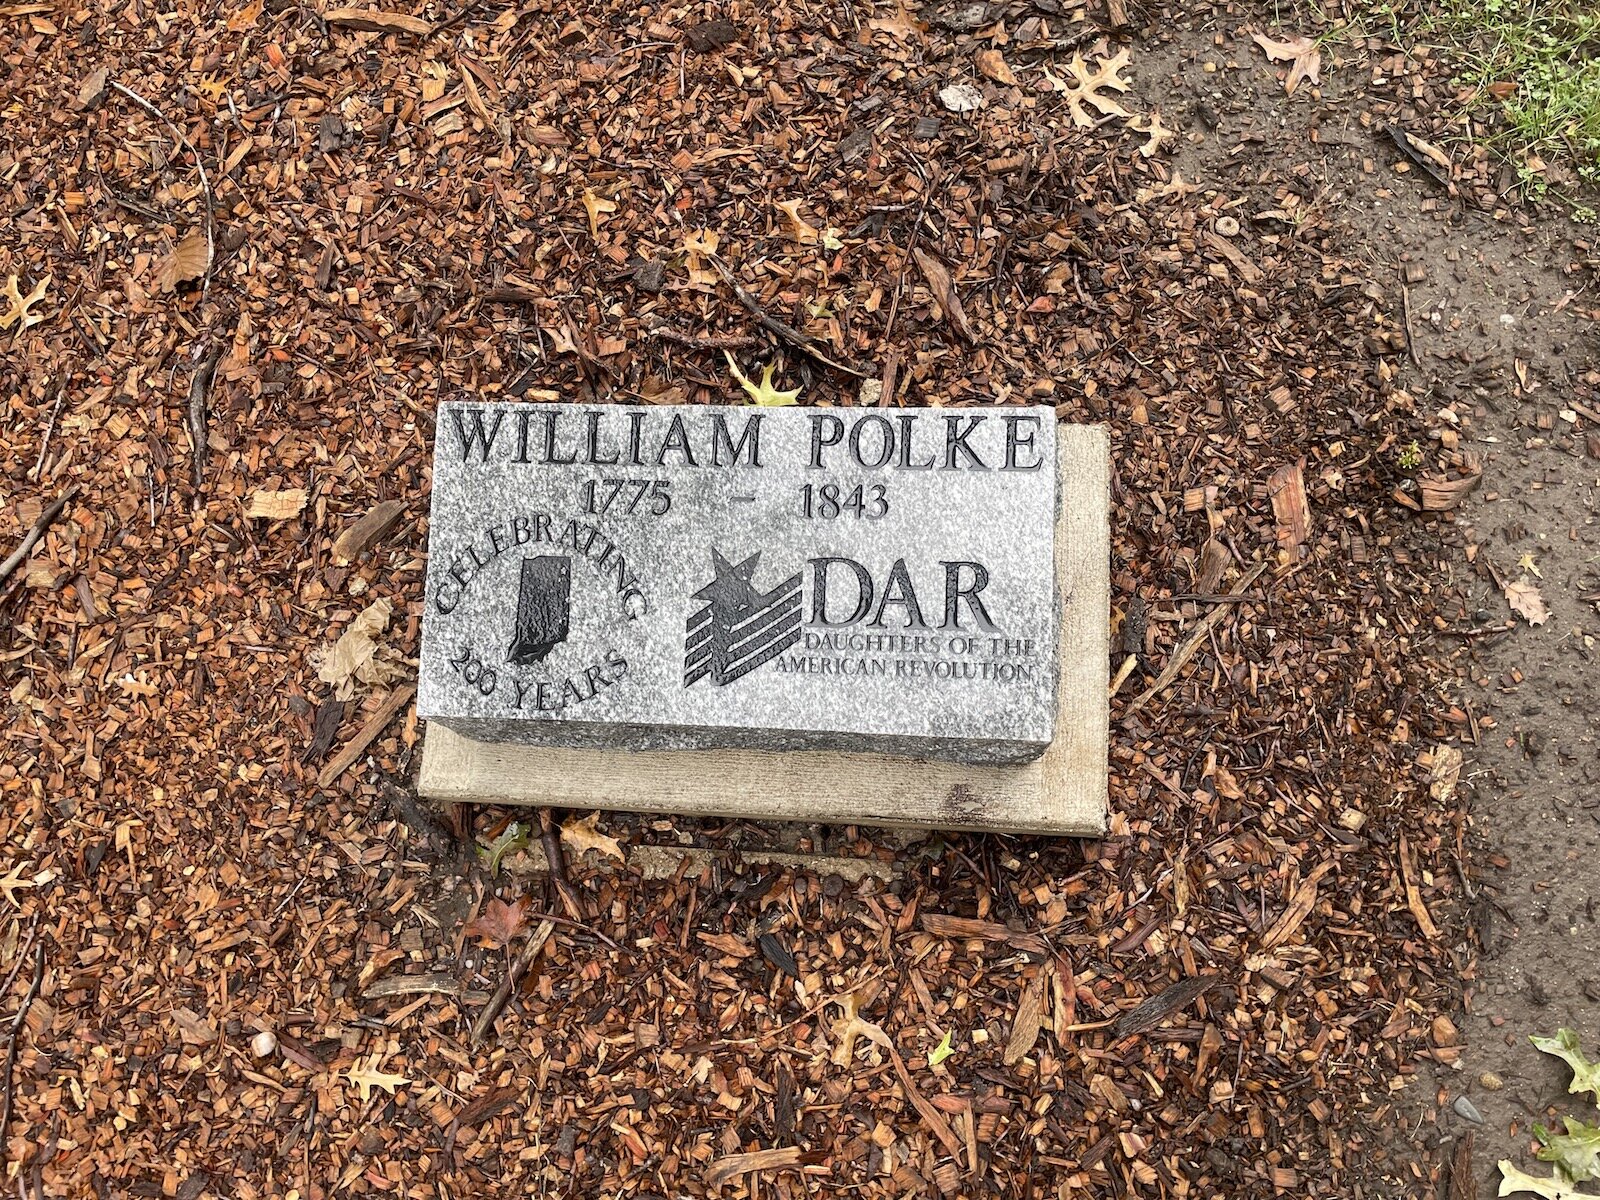 The grave of Indiana constitutional delegate William Polke was forgotten, presumably soon after his death, but researchers rediscovered it in time for the Indiana bicentennial in 2016.